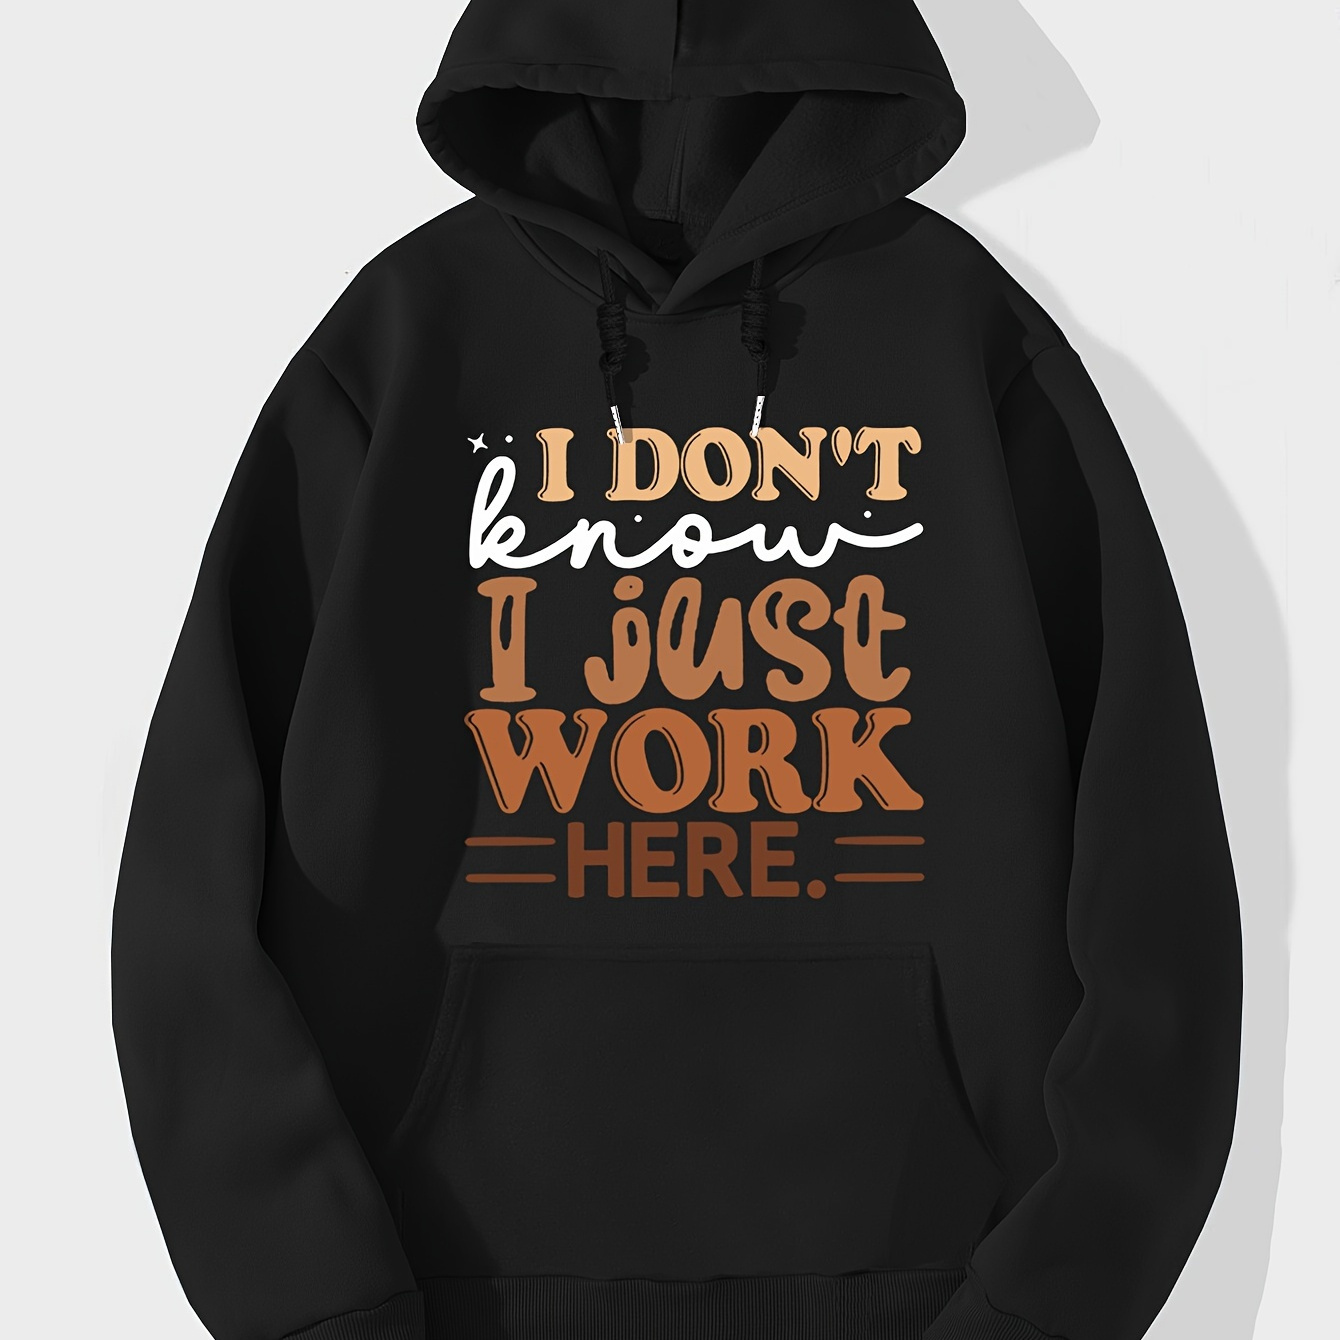 

I Don't Know I Just Work Here Letter Print Hoodie, Cool Hoodies For Men, Men's Casual Graphic Design Pullover Hooded Sweatshirt With Kangaroo Pocket Streetwear For Winter Fall, As Gifts